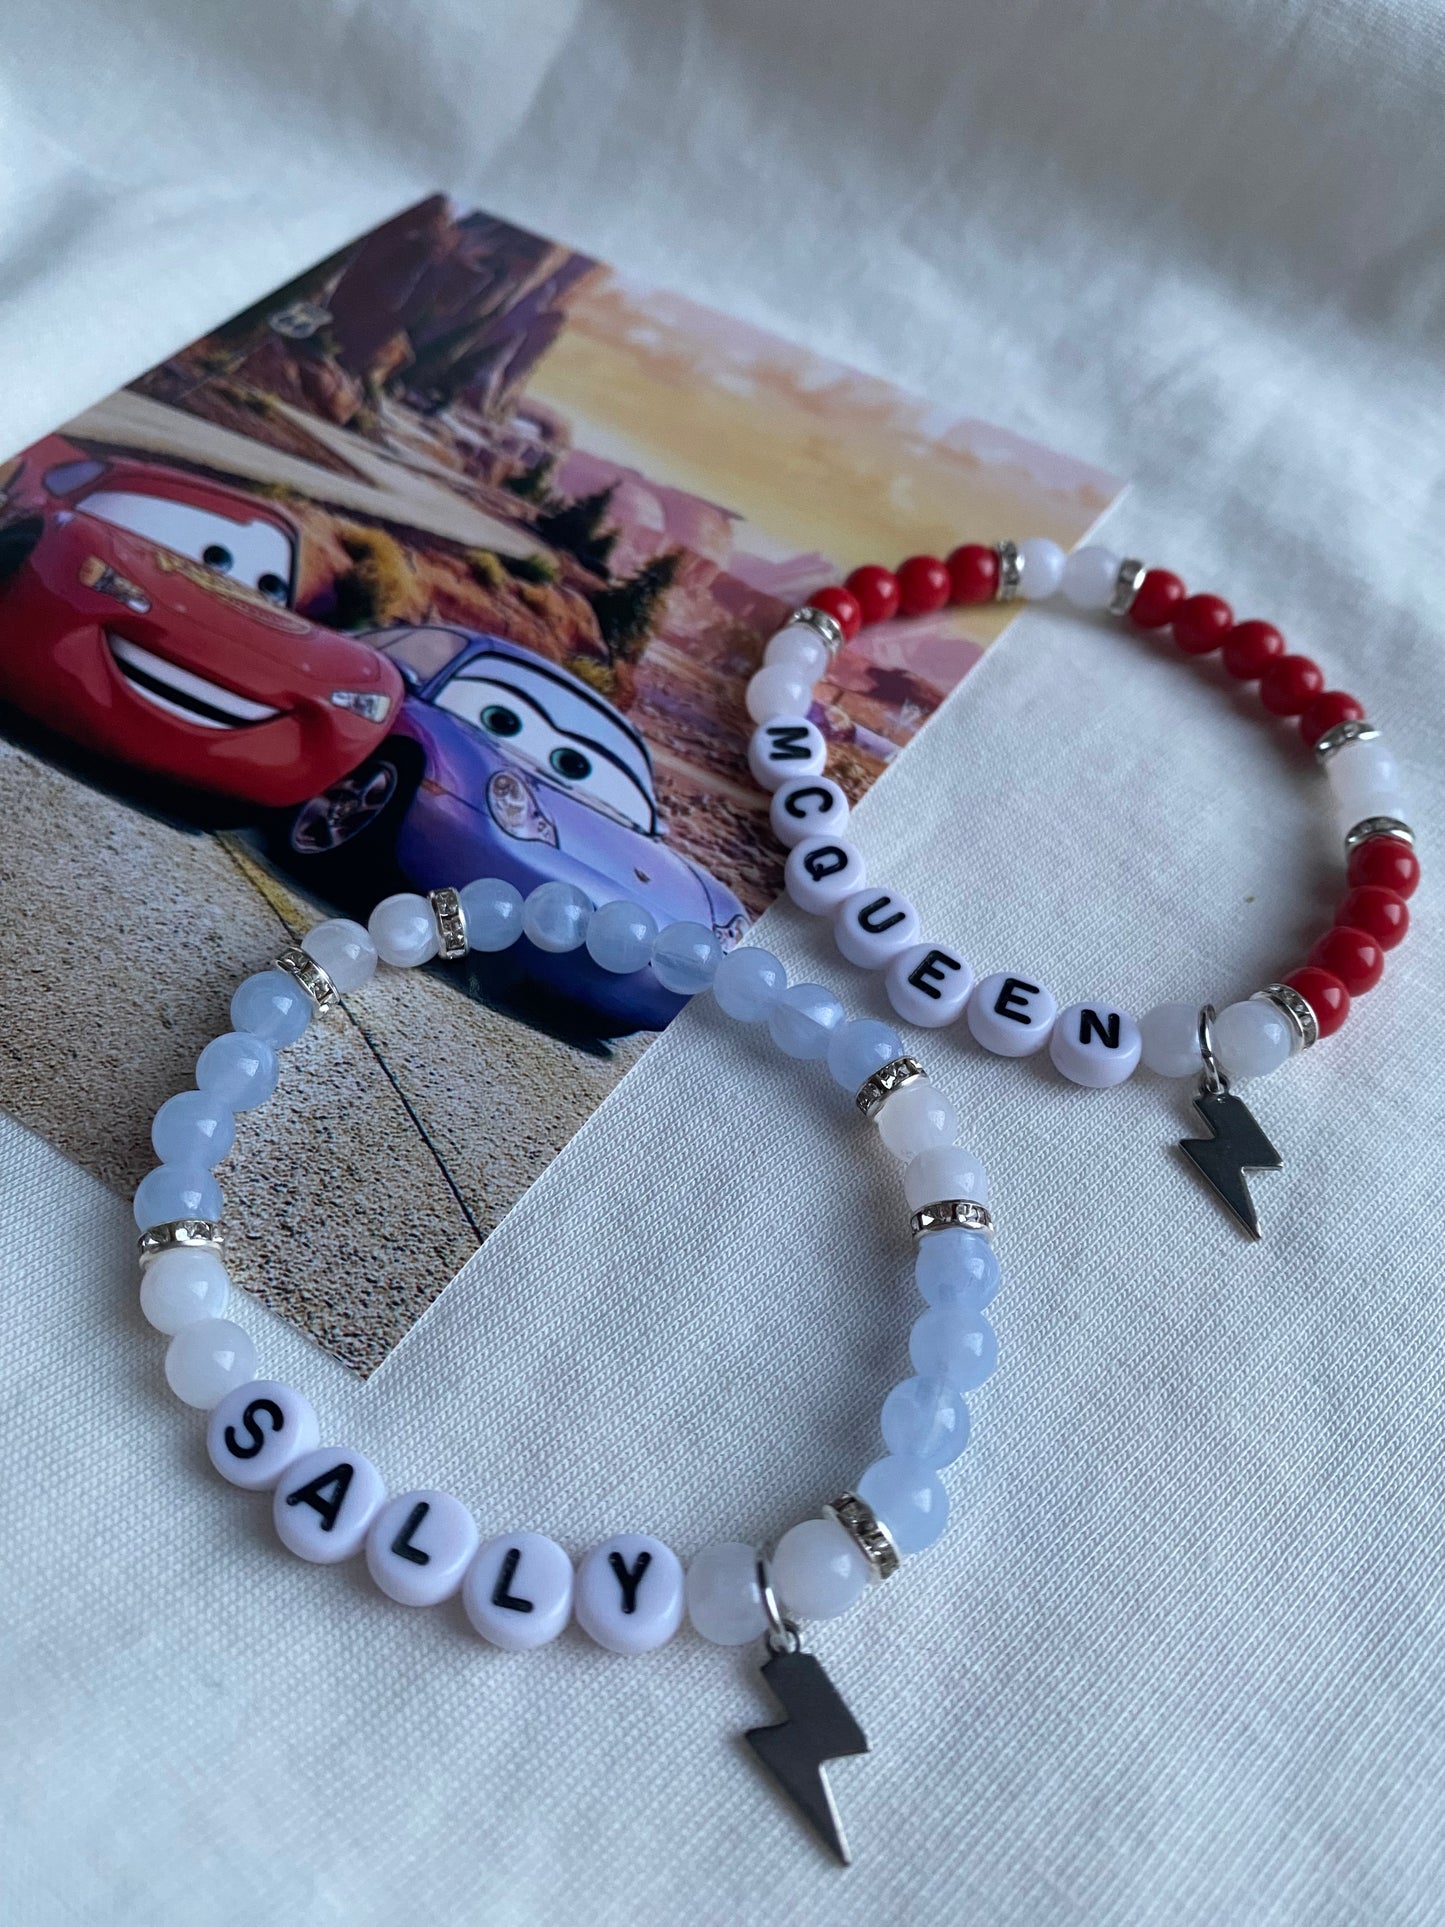 McQueen and Sally matching bracelets